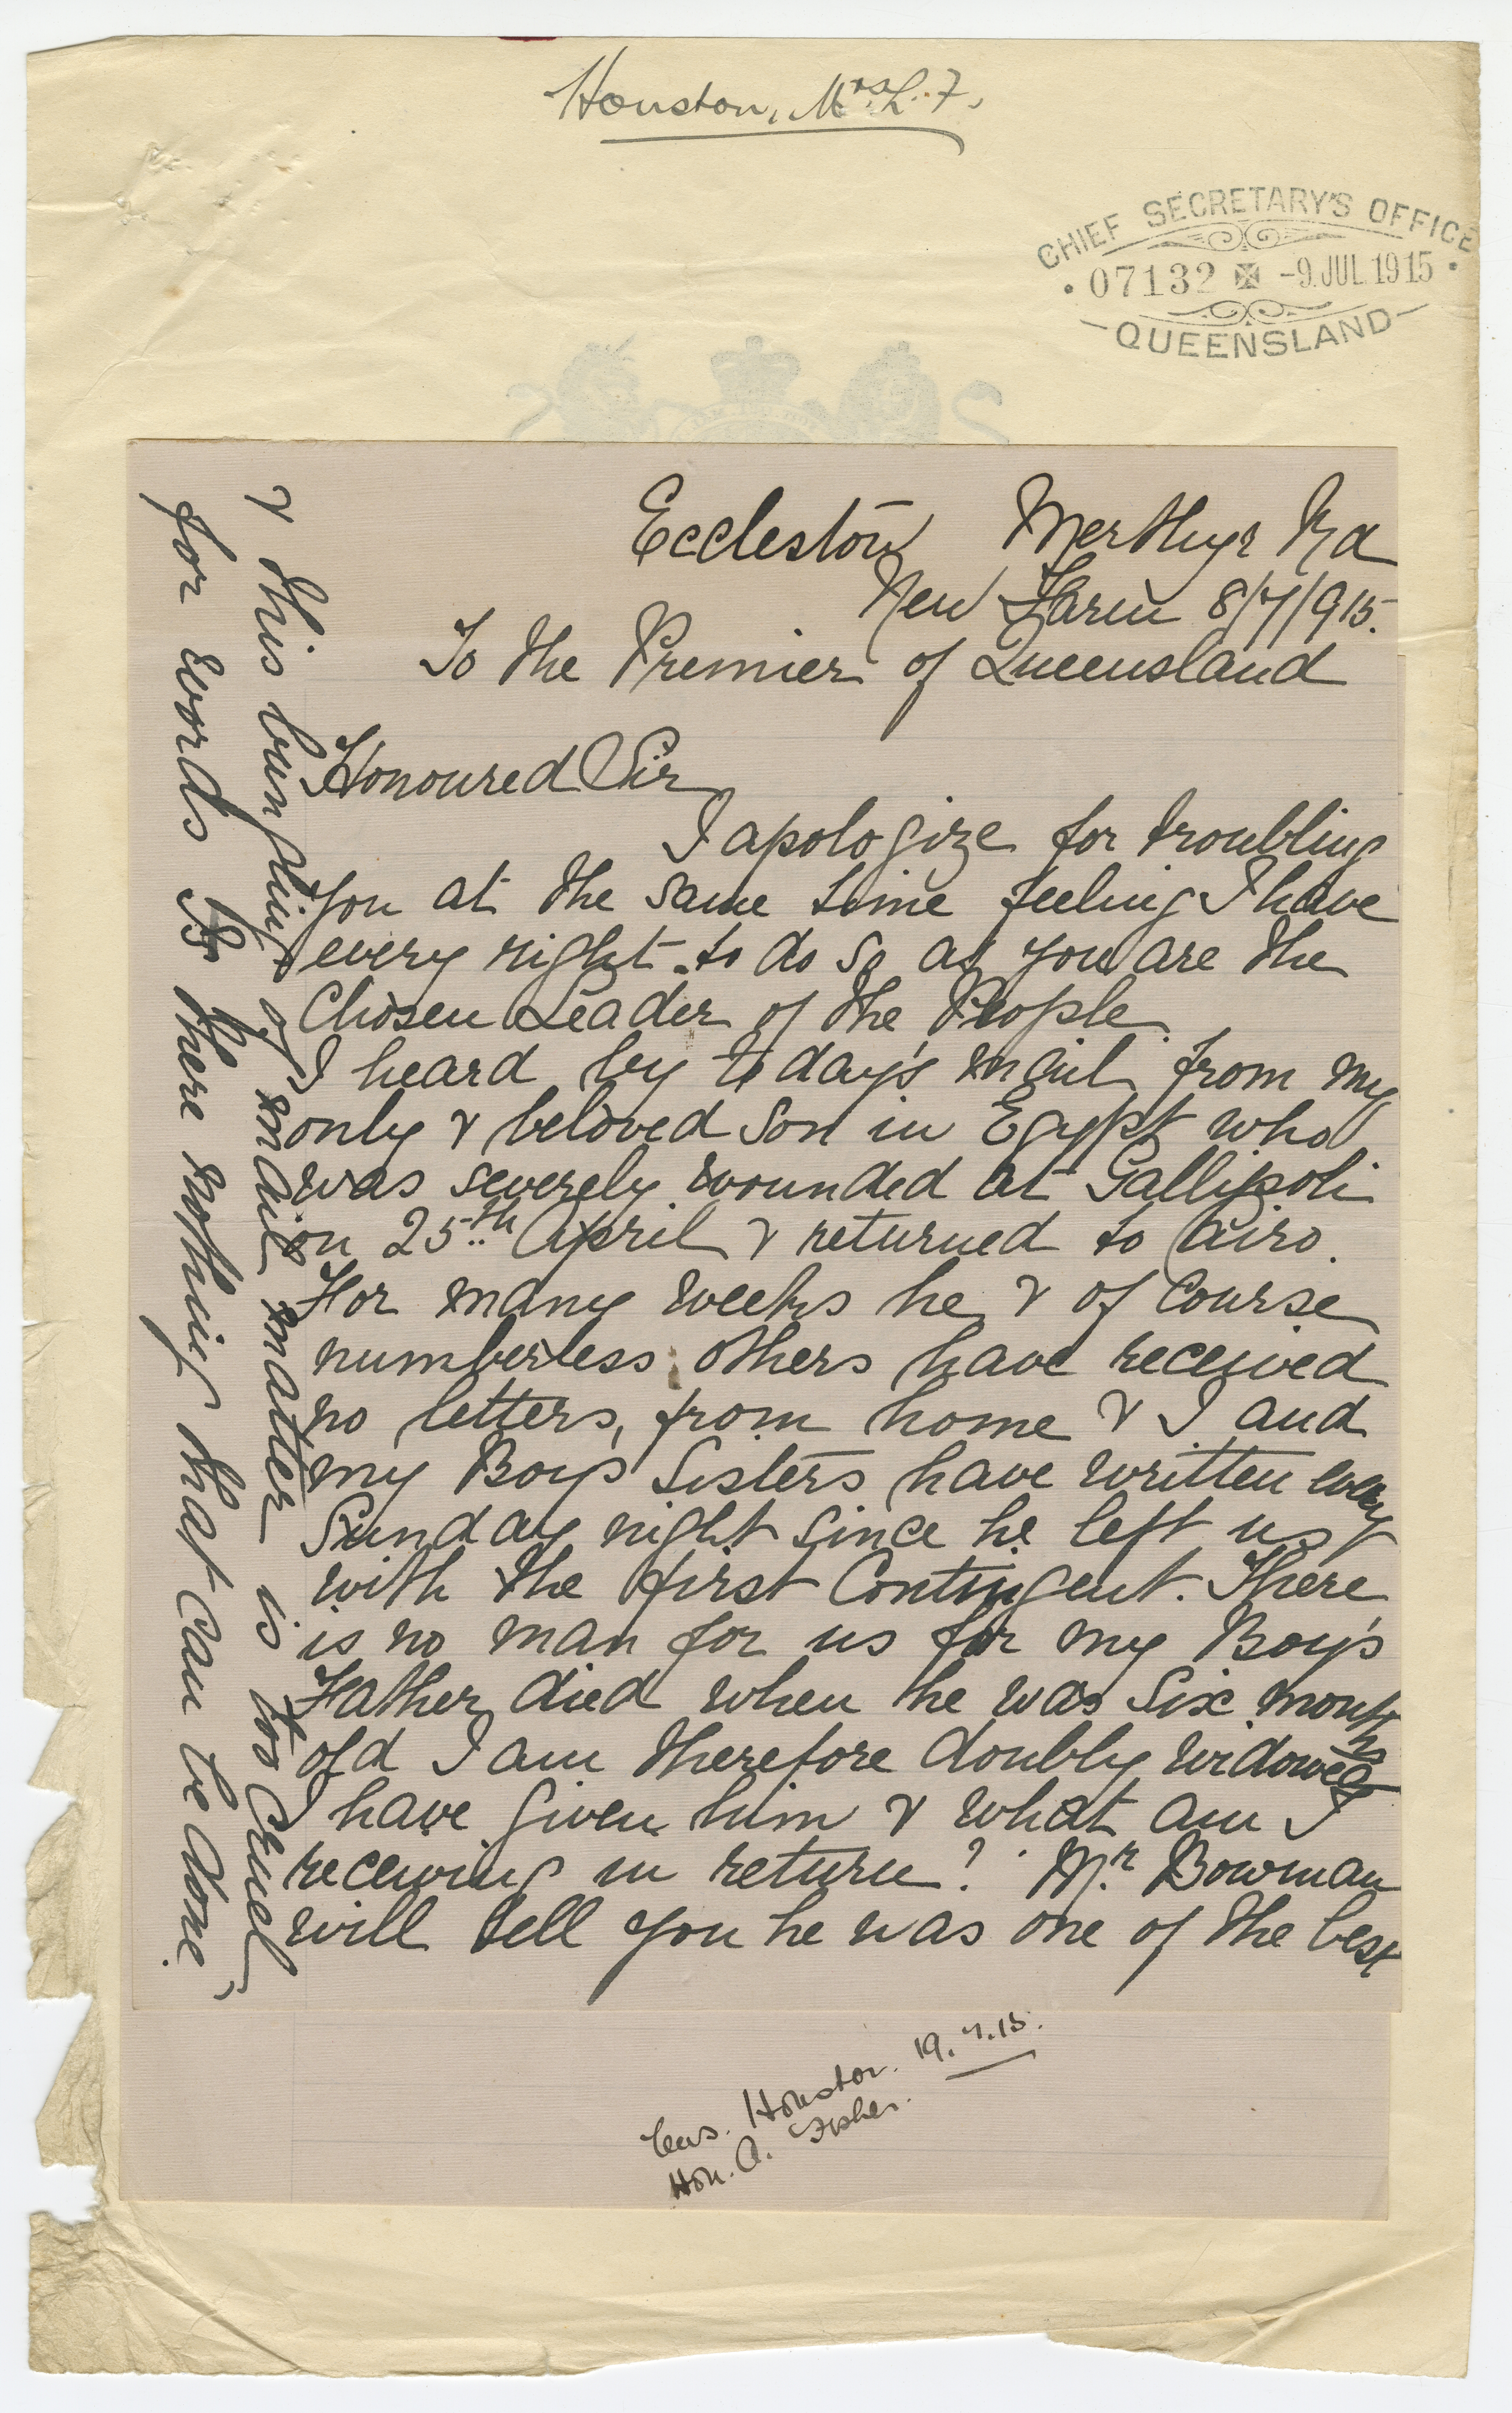 Queensland Archives image of Lallie Fowler Houston letter to Queensland Premier T J Ryan